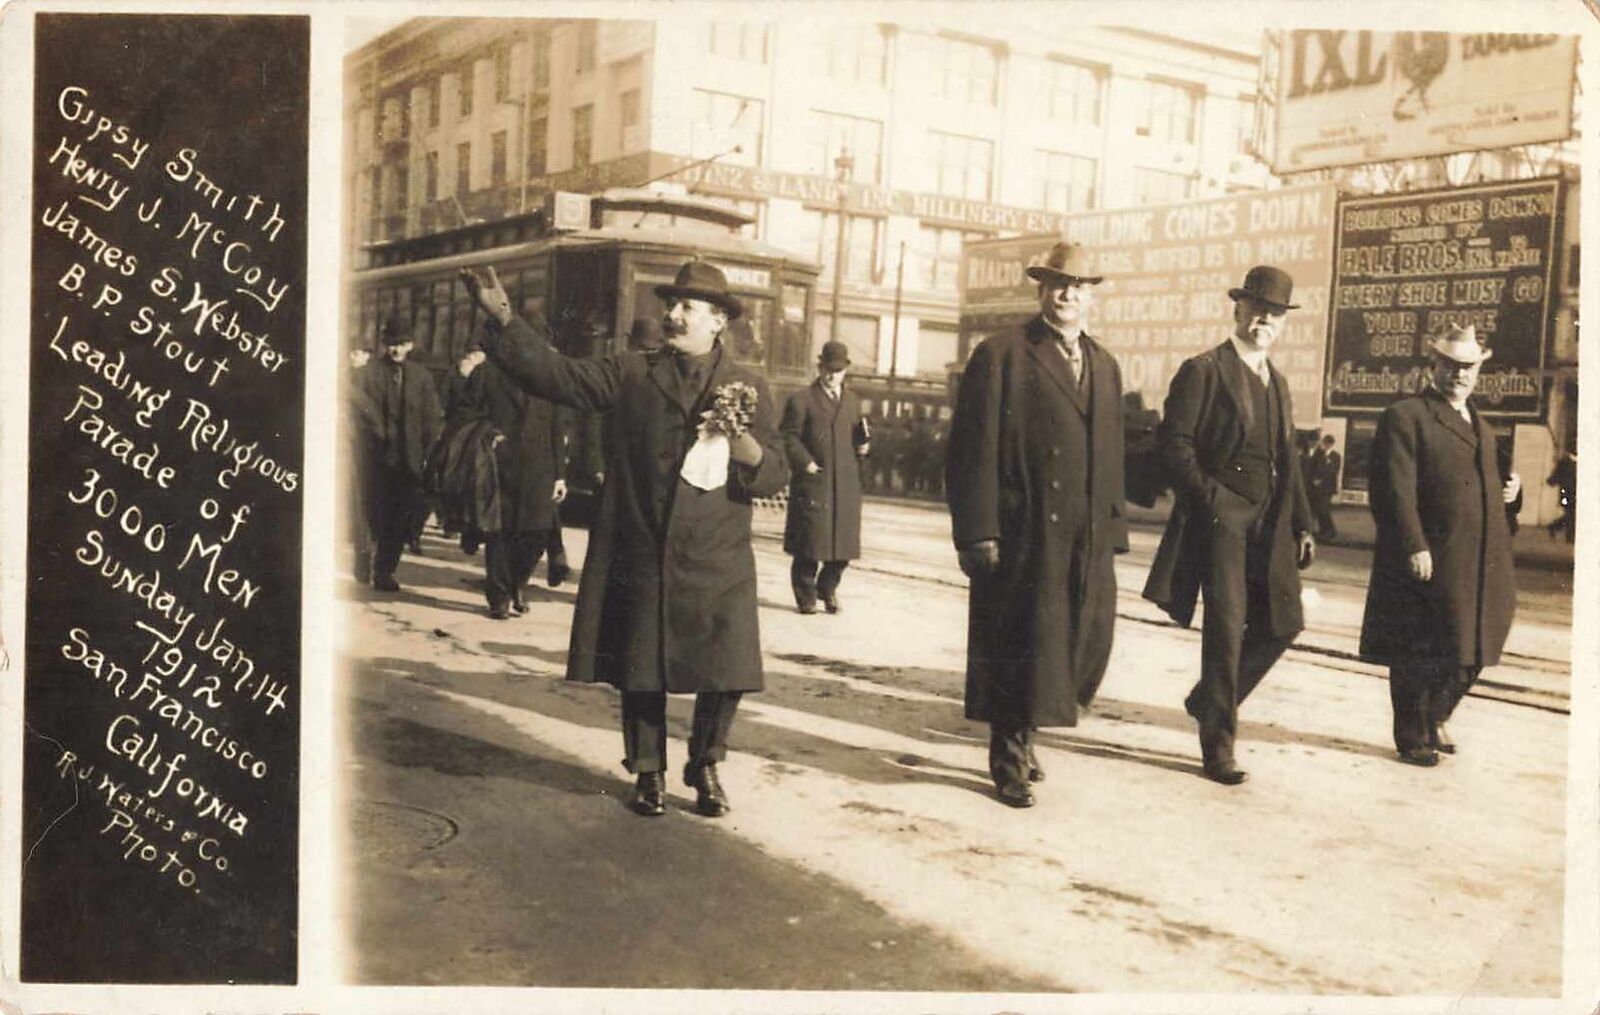 1912 RPPC Evangelists MARCH 3000 MEN In San Francisco Great Signage Gipsy Smith 